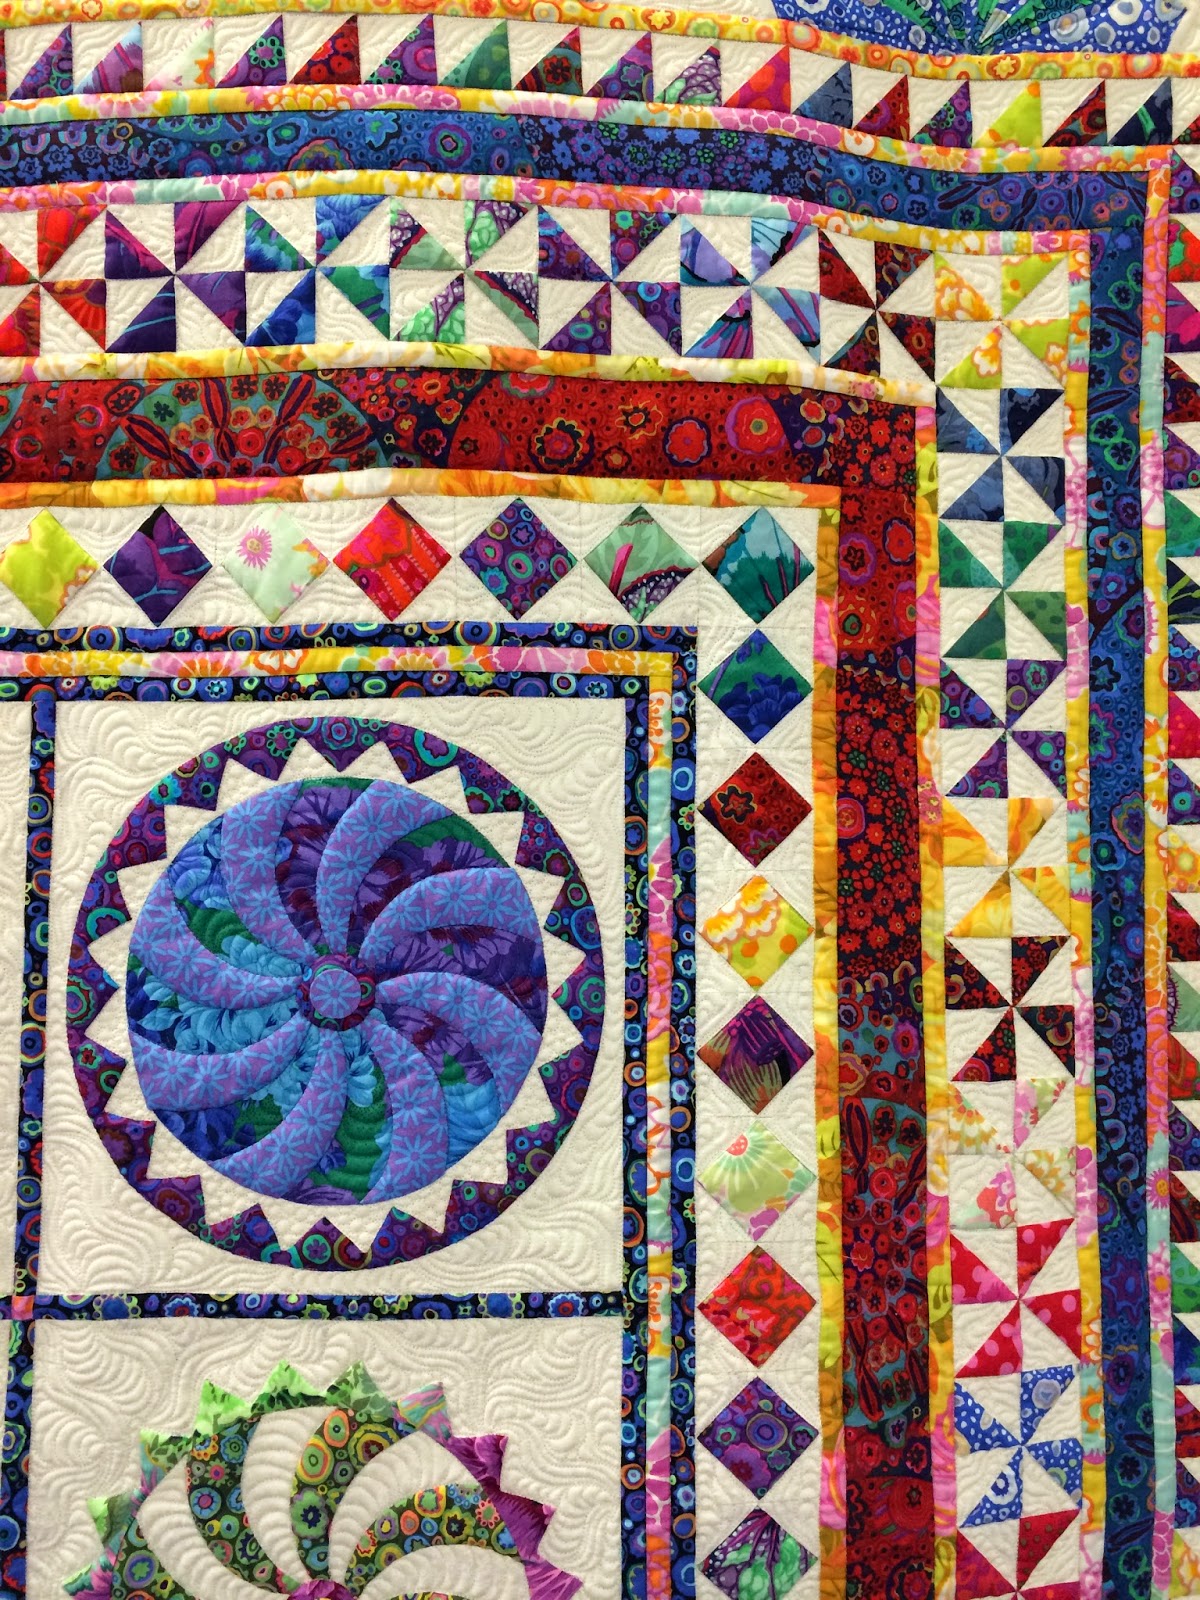 Janet Ann Creations ~ Quilts and More!: April 20151200 x 1600